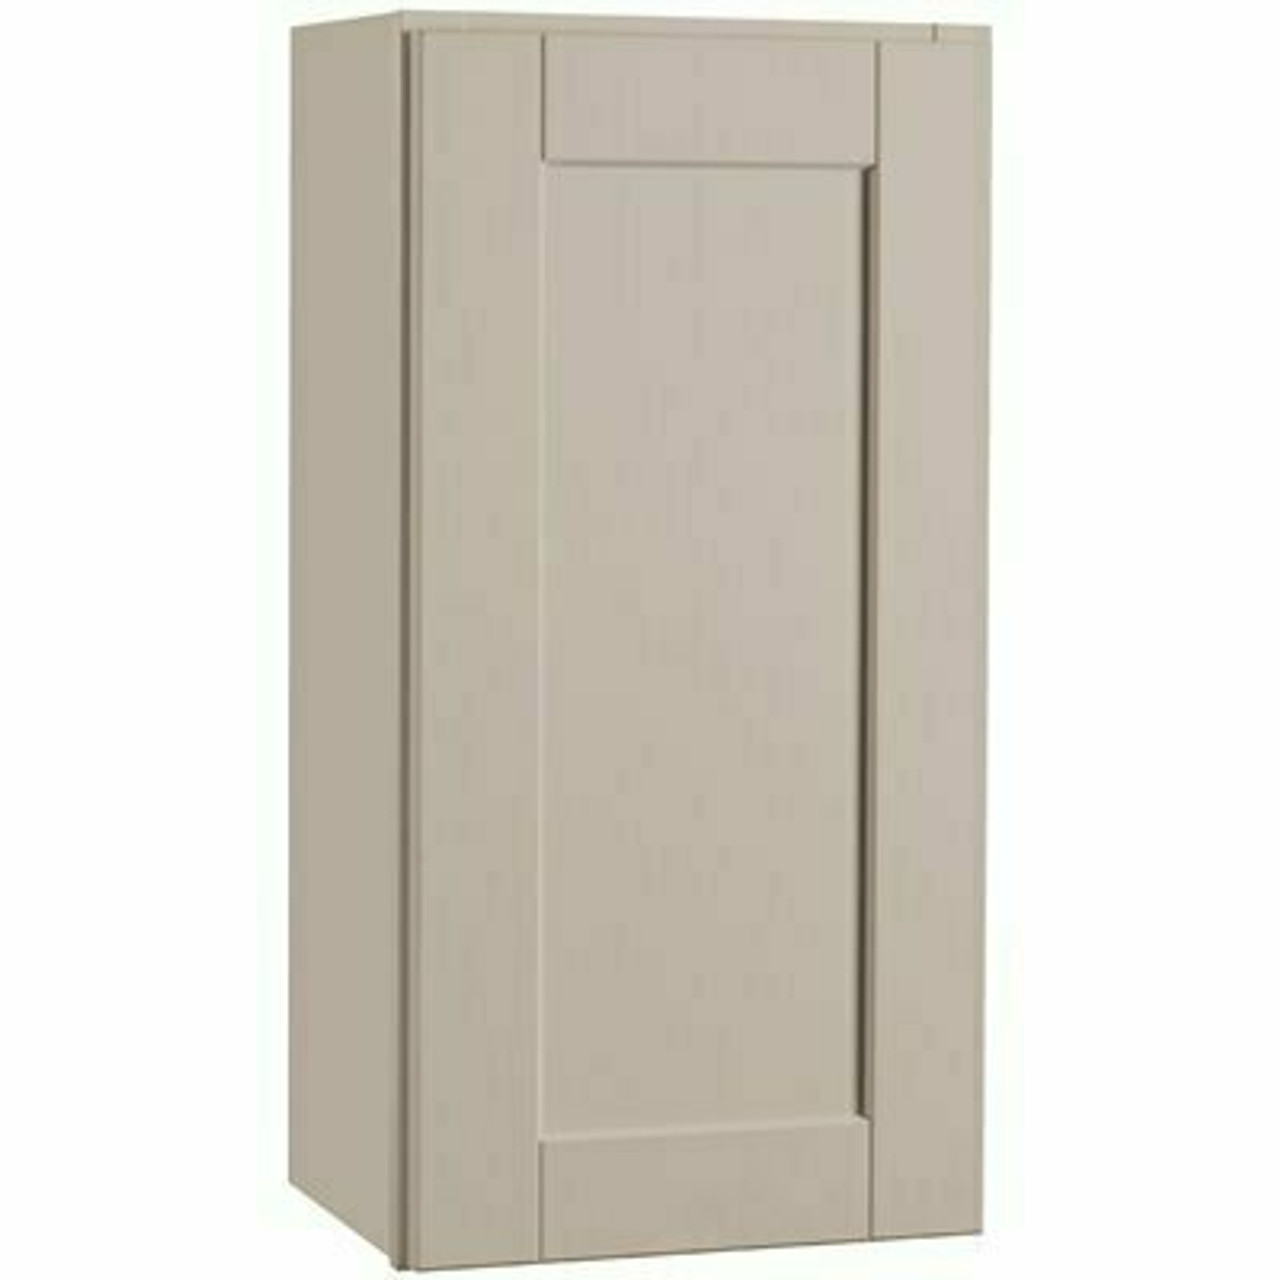 Hampton Bay Shaker Assembled 15X30X12 In. Wall Kitchen Cabinet In Dove Gray